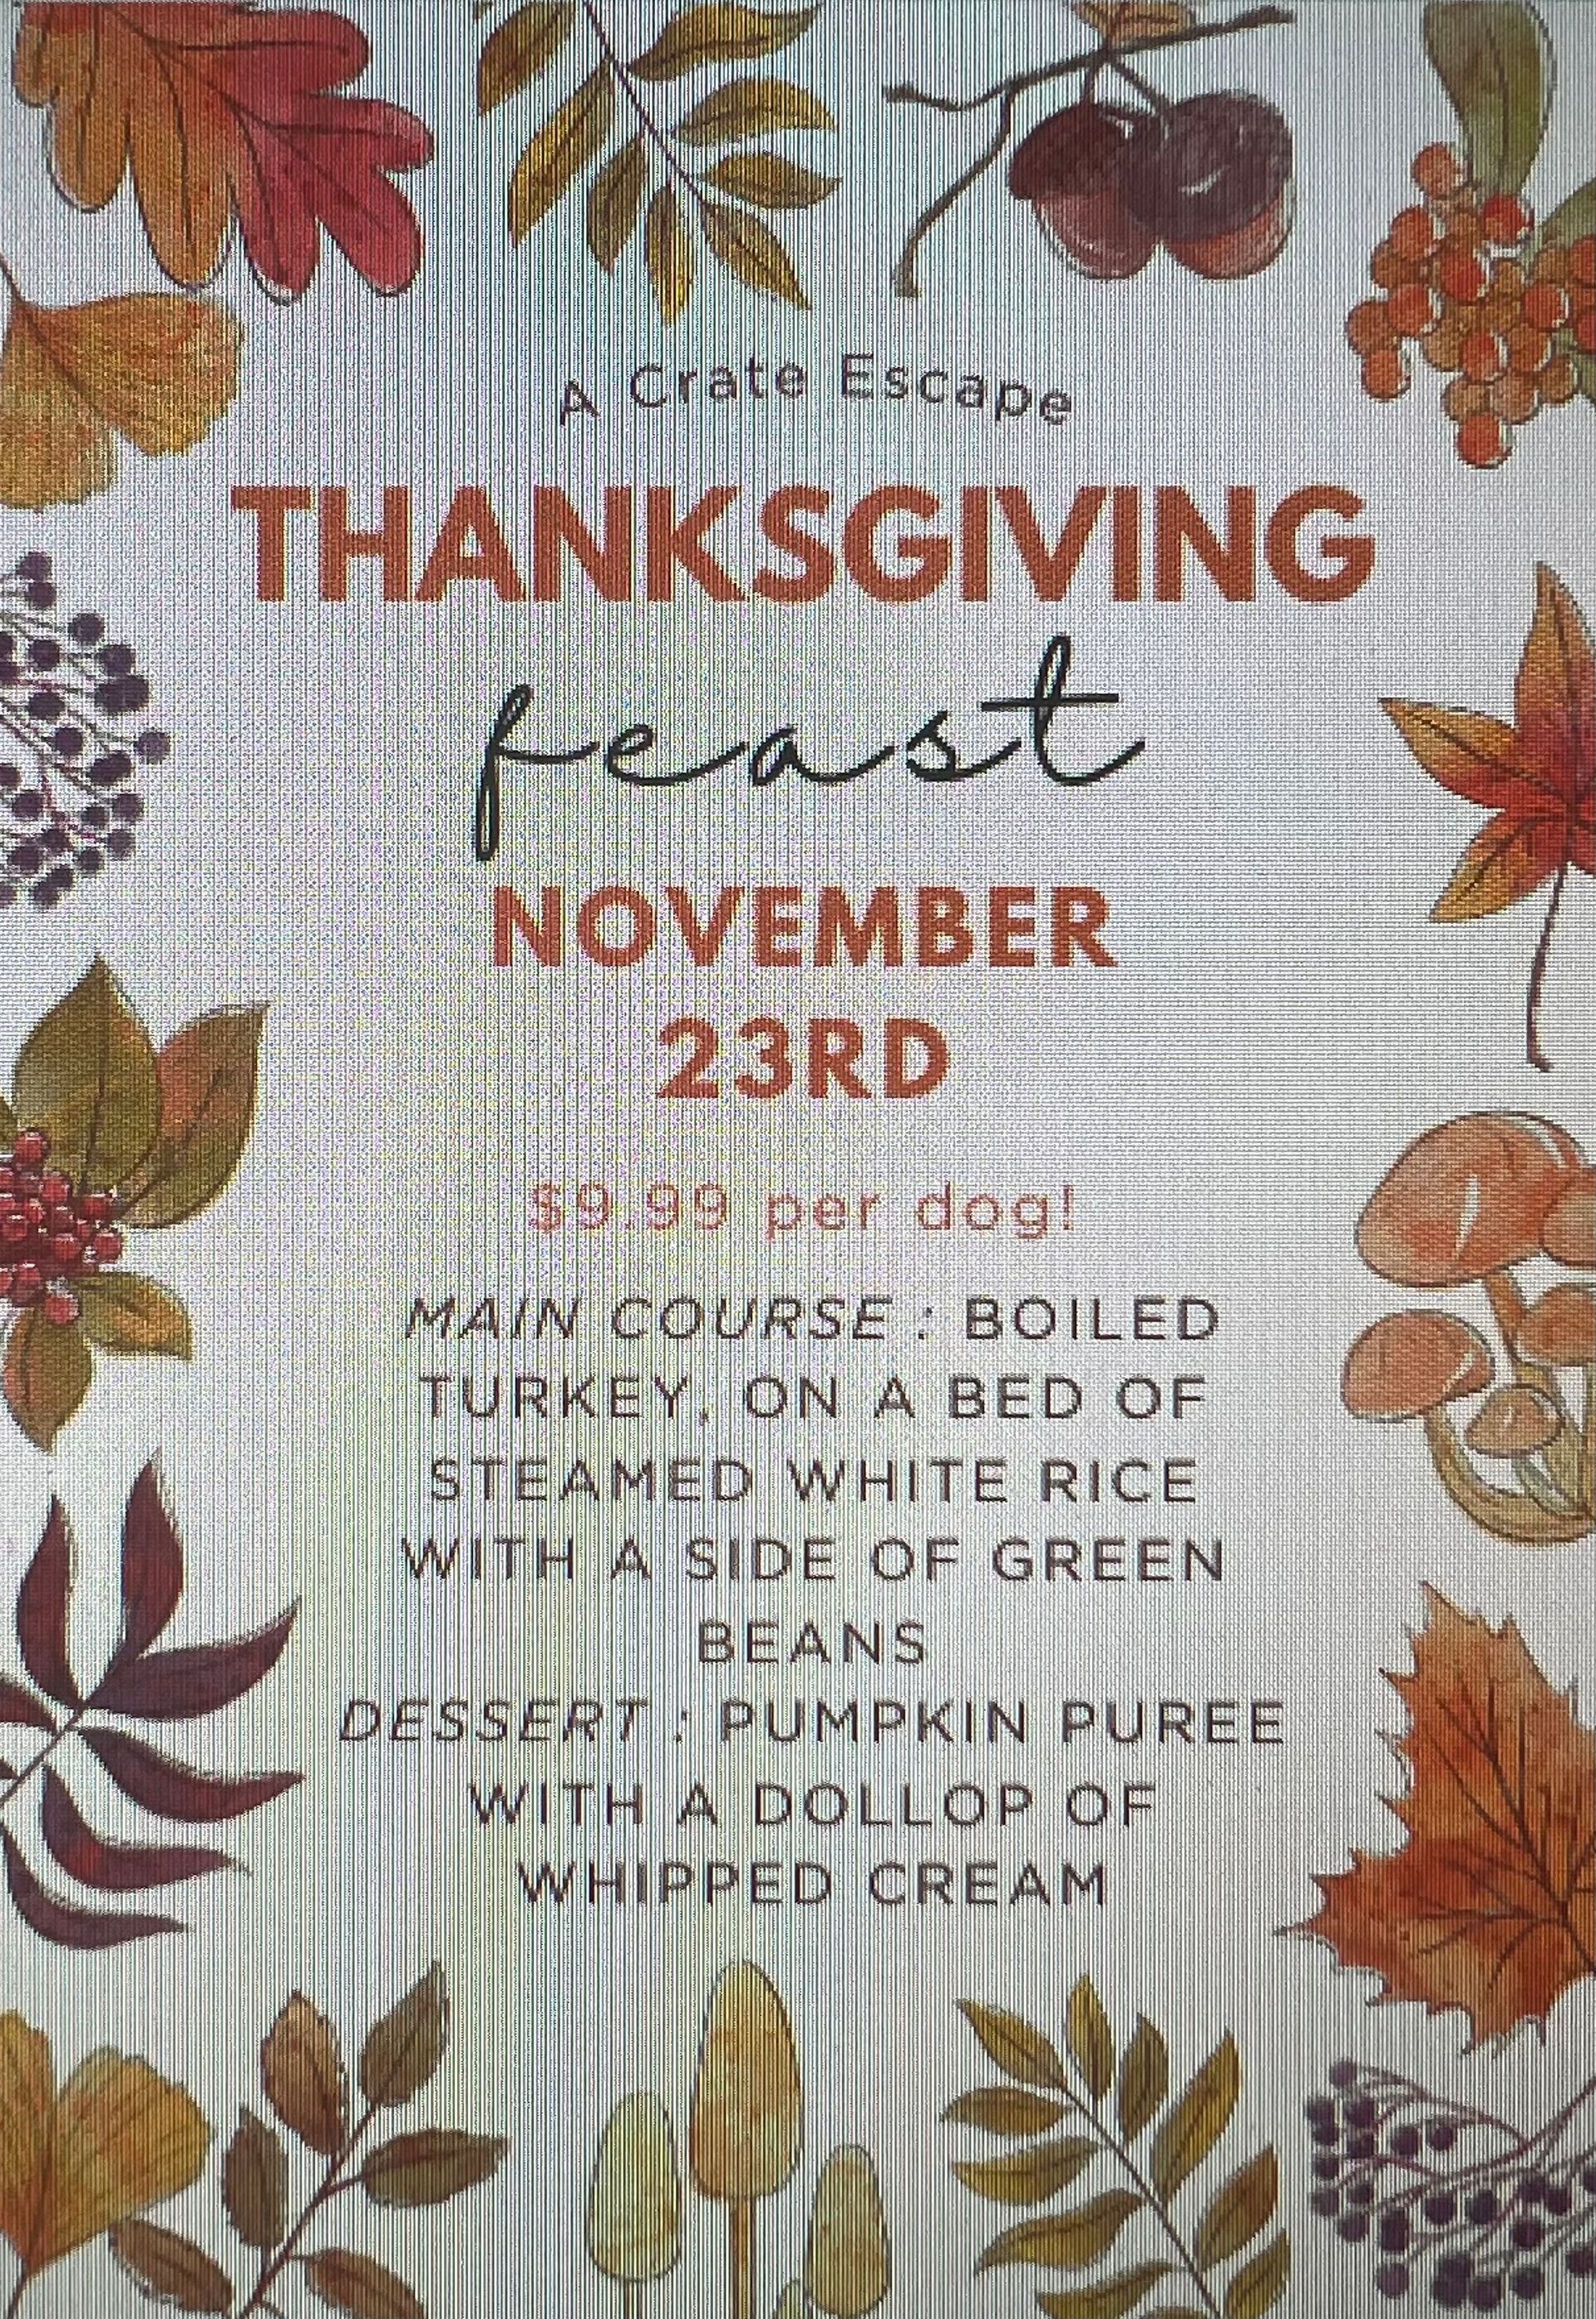 a thanksgiving feast is being held on November 23rd